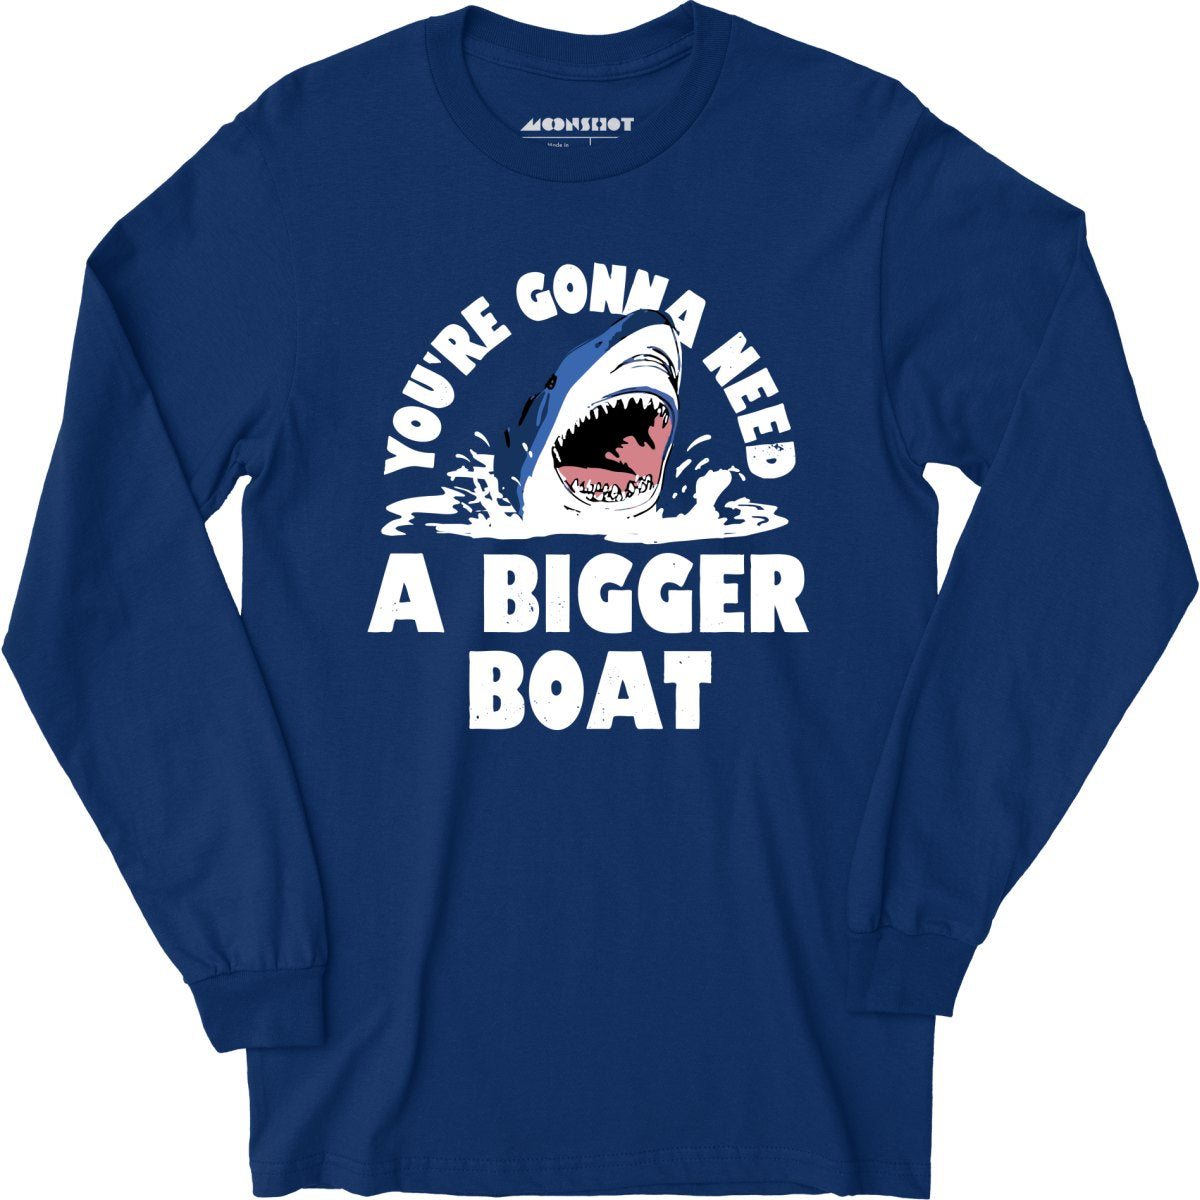 You're Gonna Need A Bigger boat - Long Sleeve T-Shirt